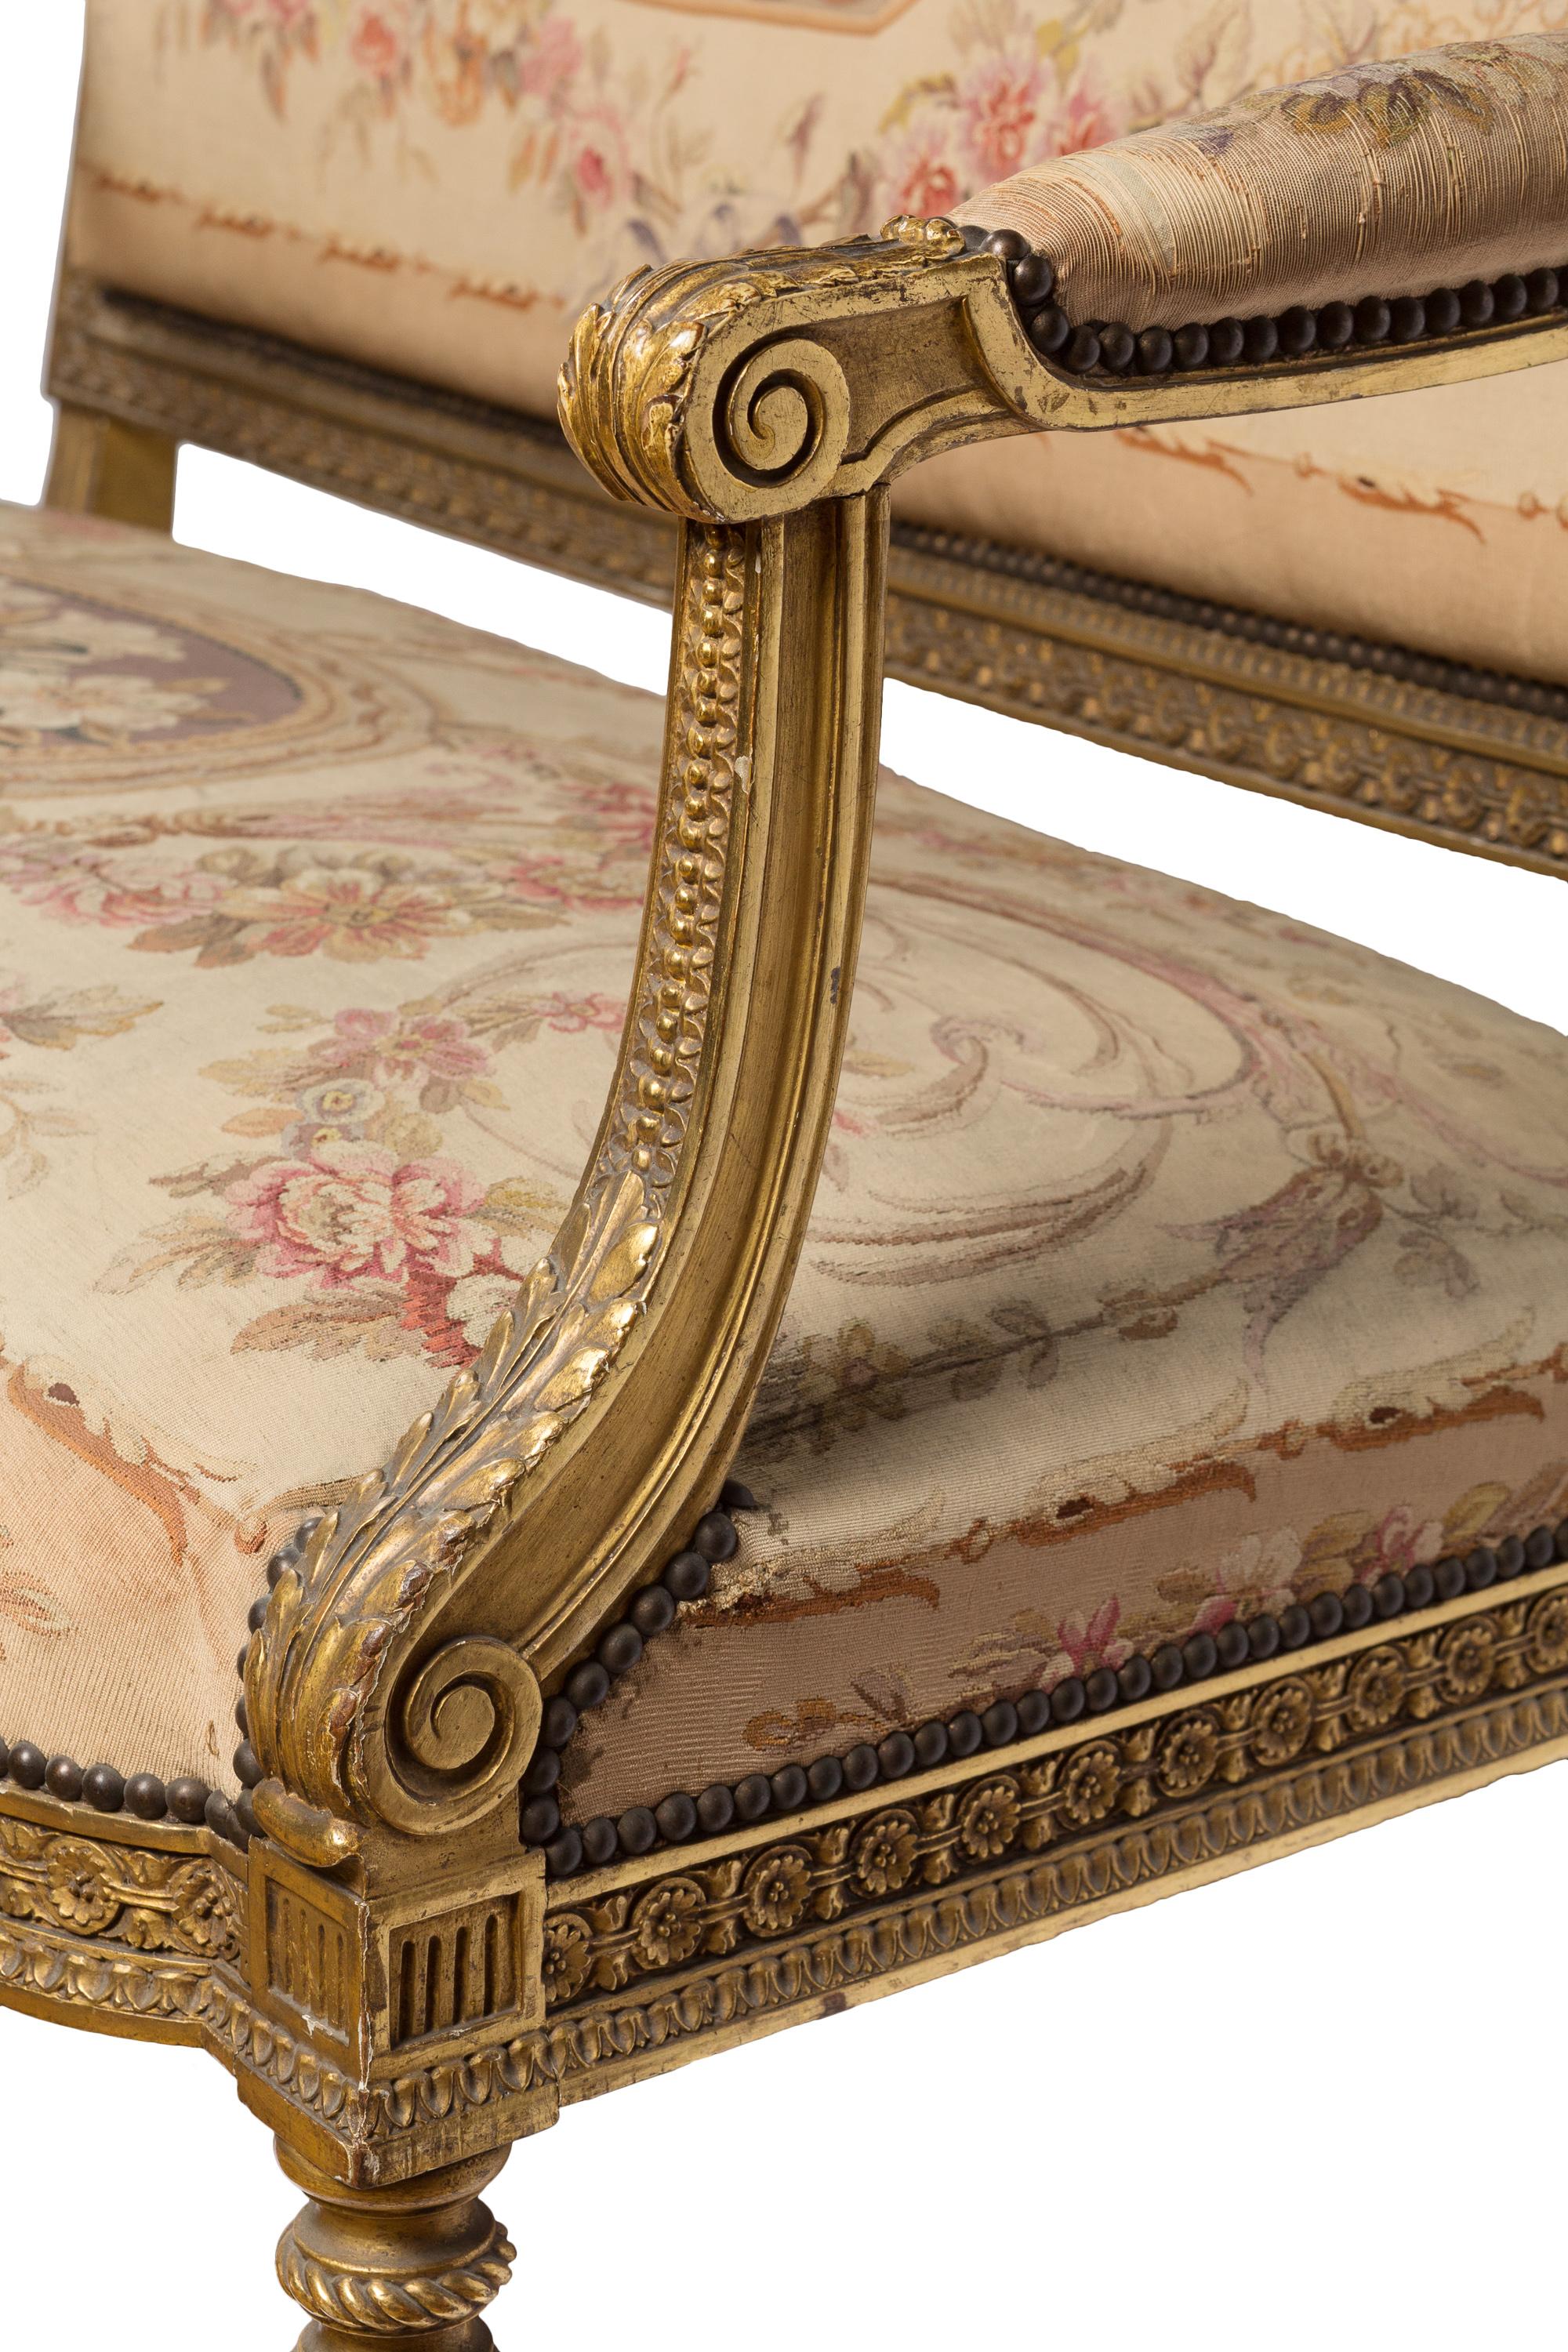 Carved Antique Louis XVI Style Sofa, 4 Chair Salon Suite, Aubusson Tapestry Upholstery For Sale